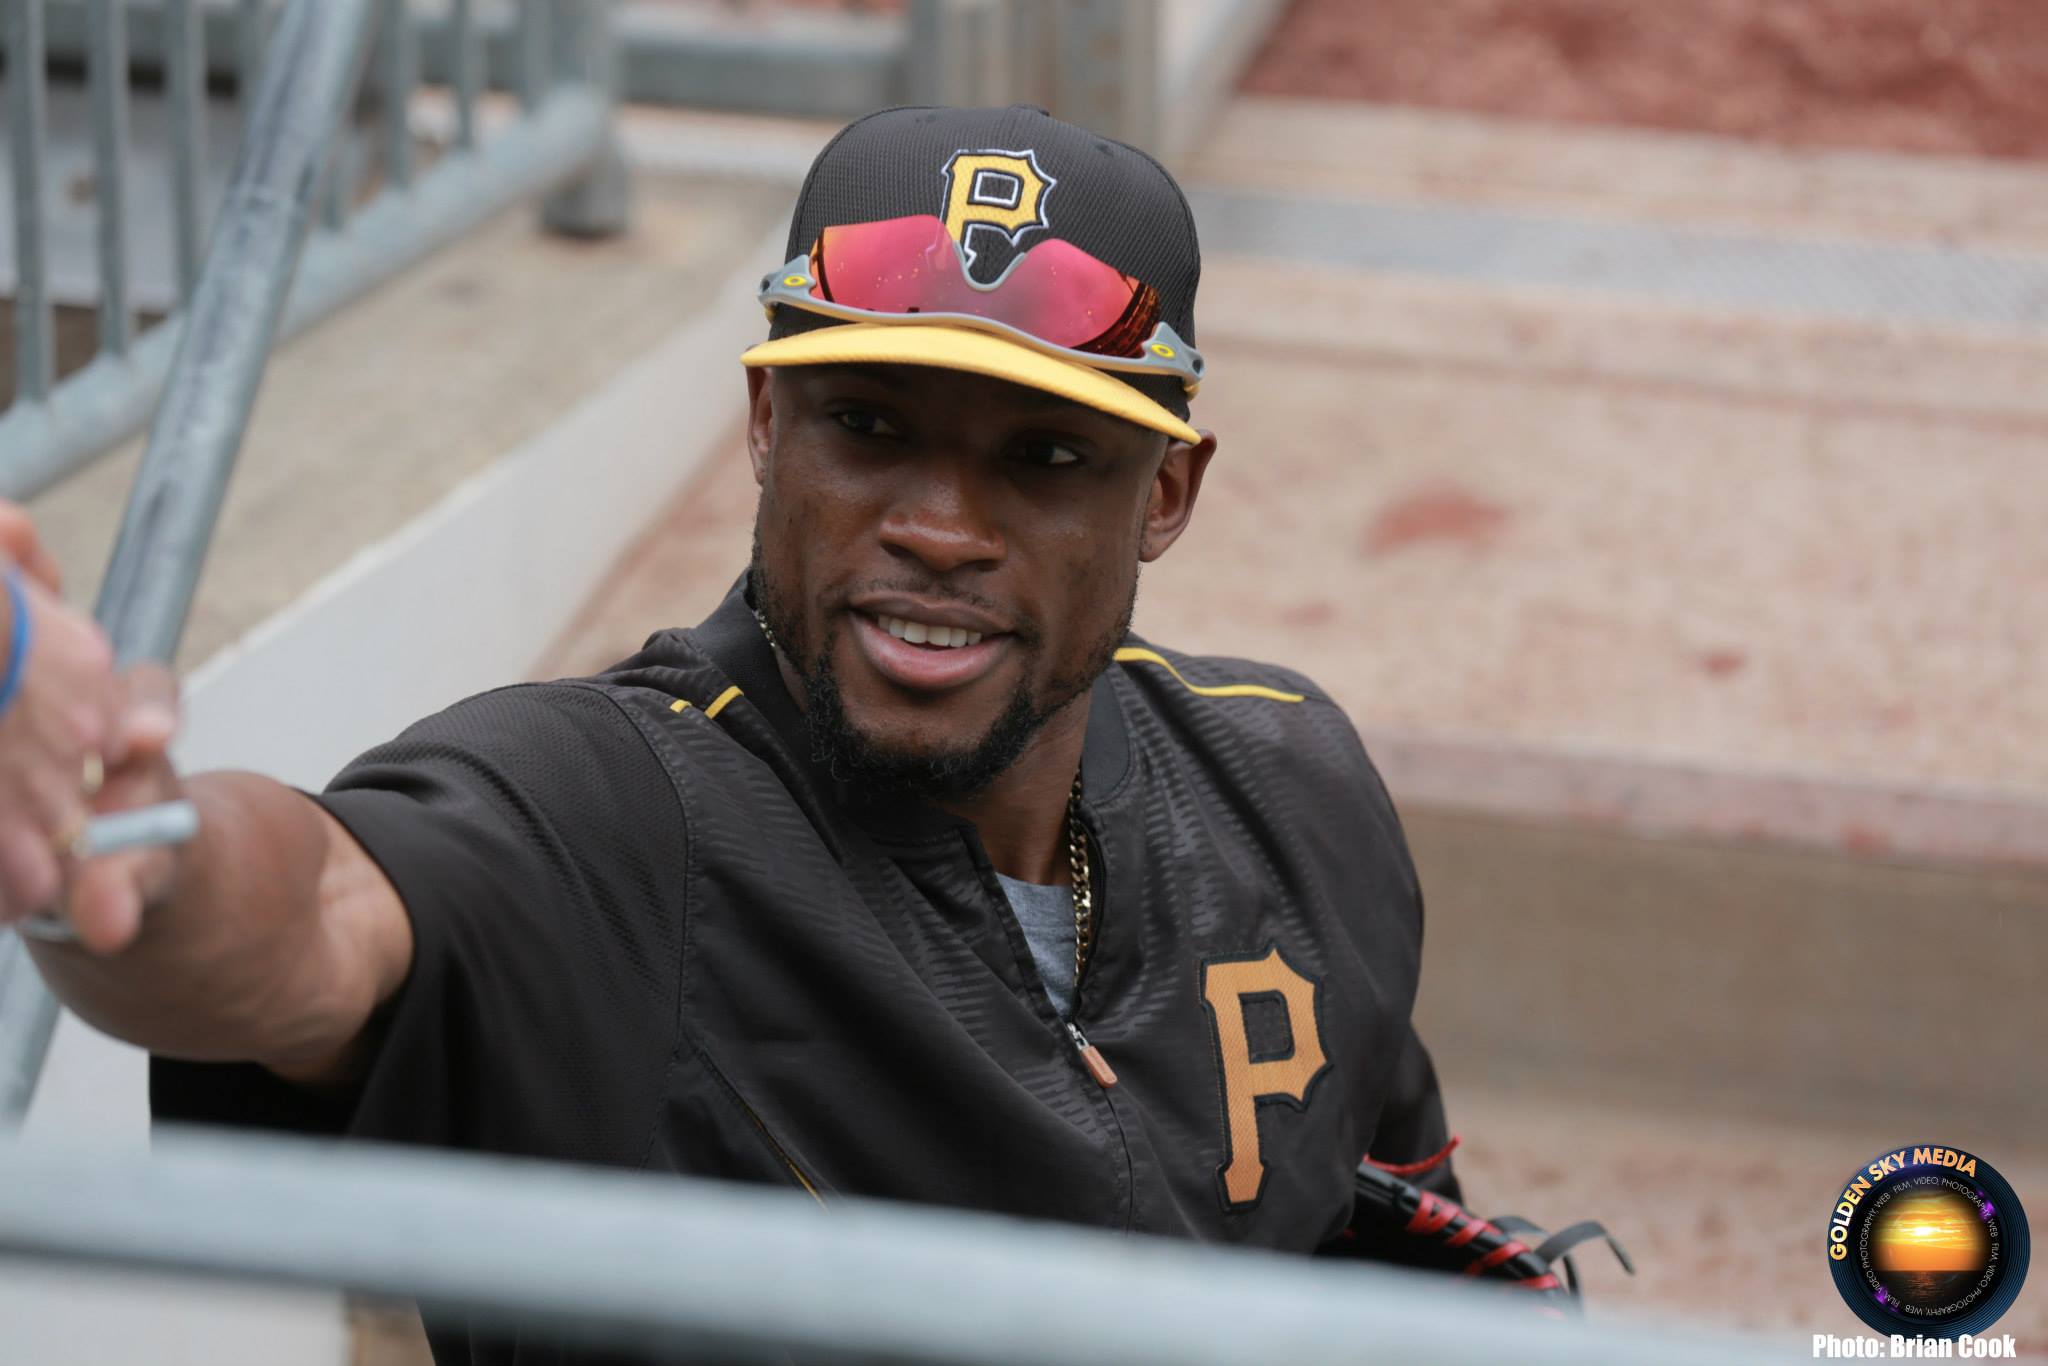 Wife of Former Pittsburgh Pirate Starling Marte Dies - Golden Sky